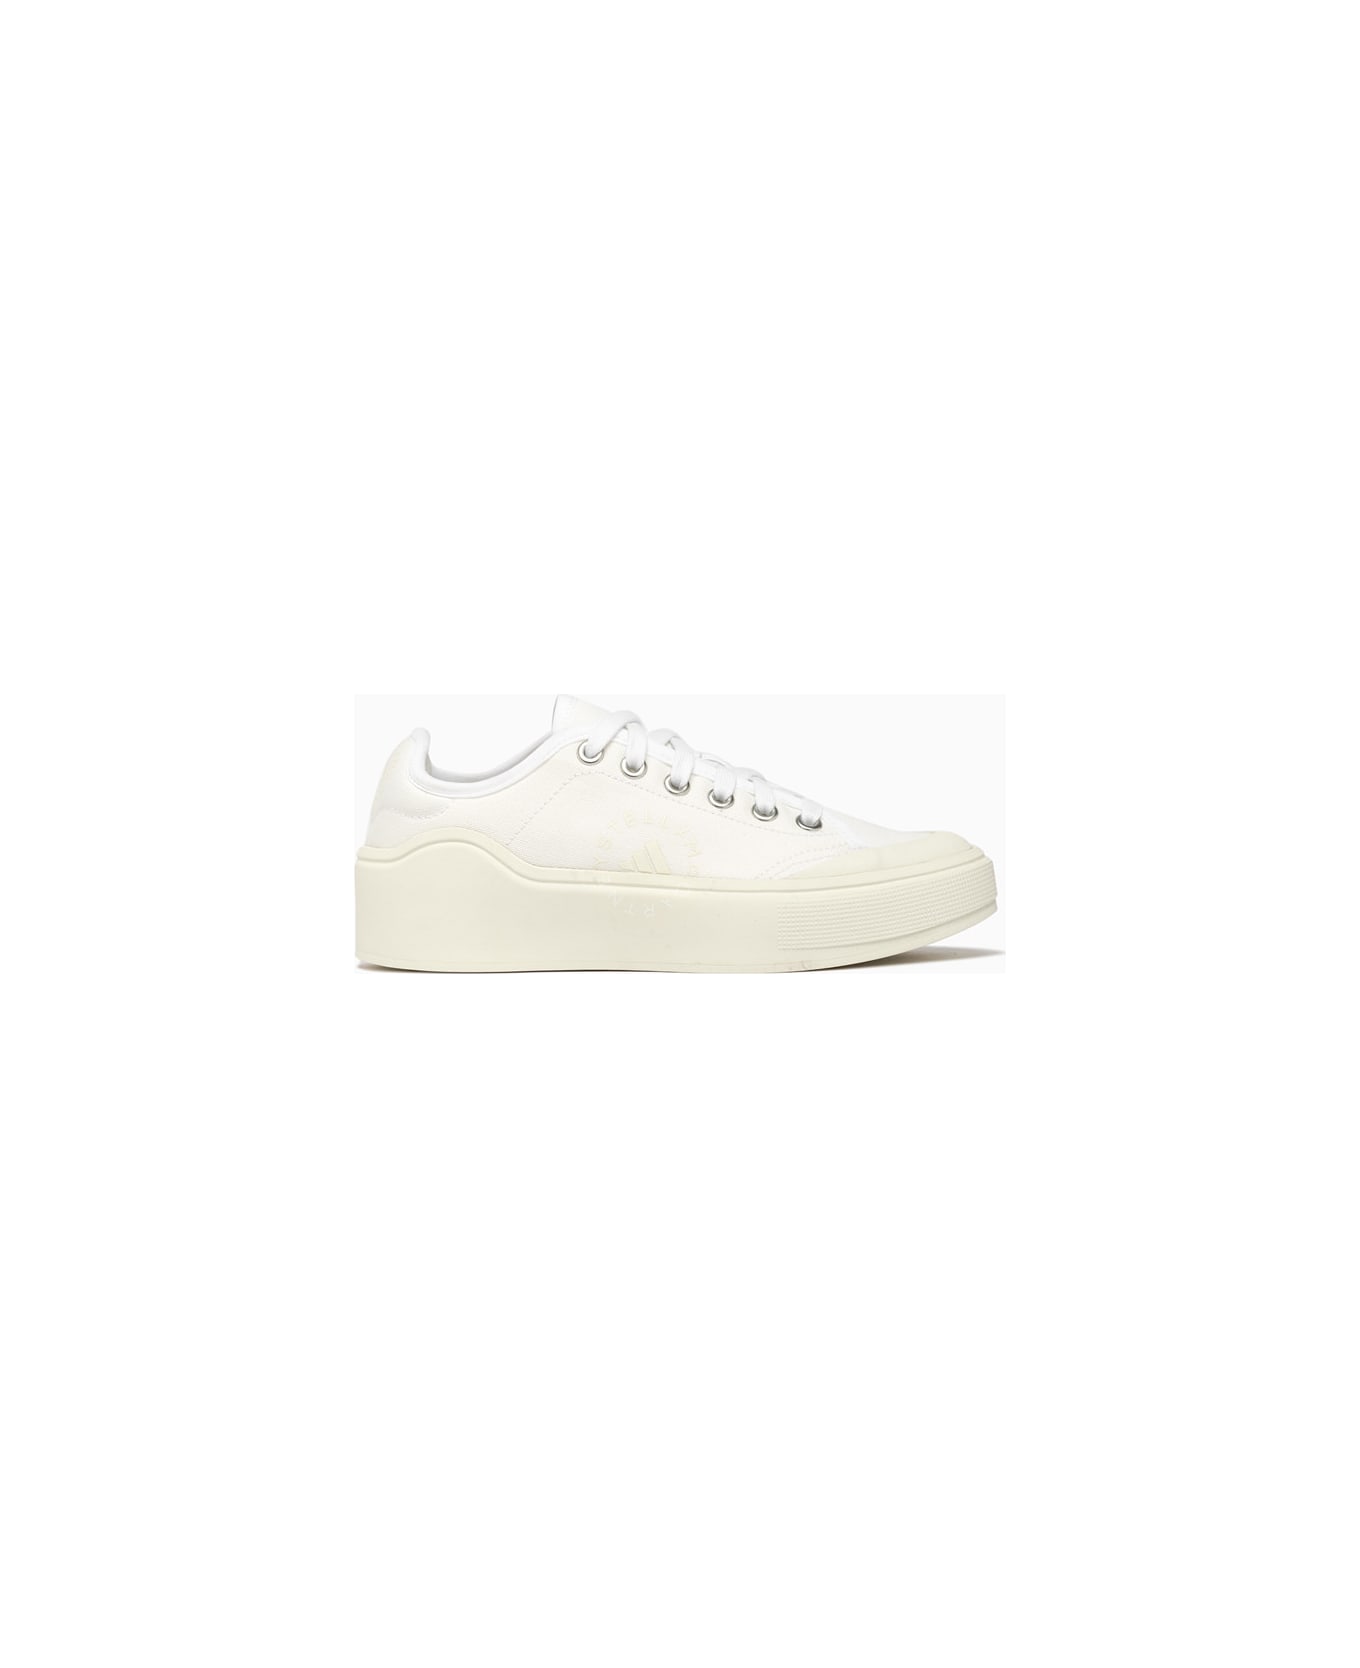 Adidas by Stella McCartney Court Cotton Sneakers Hq8675 スニーカー